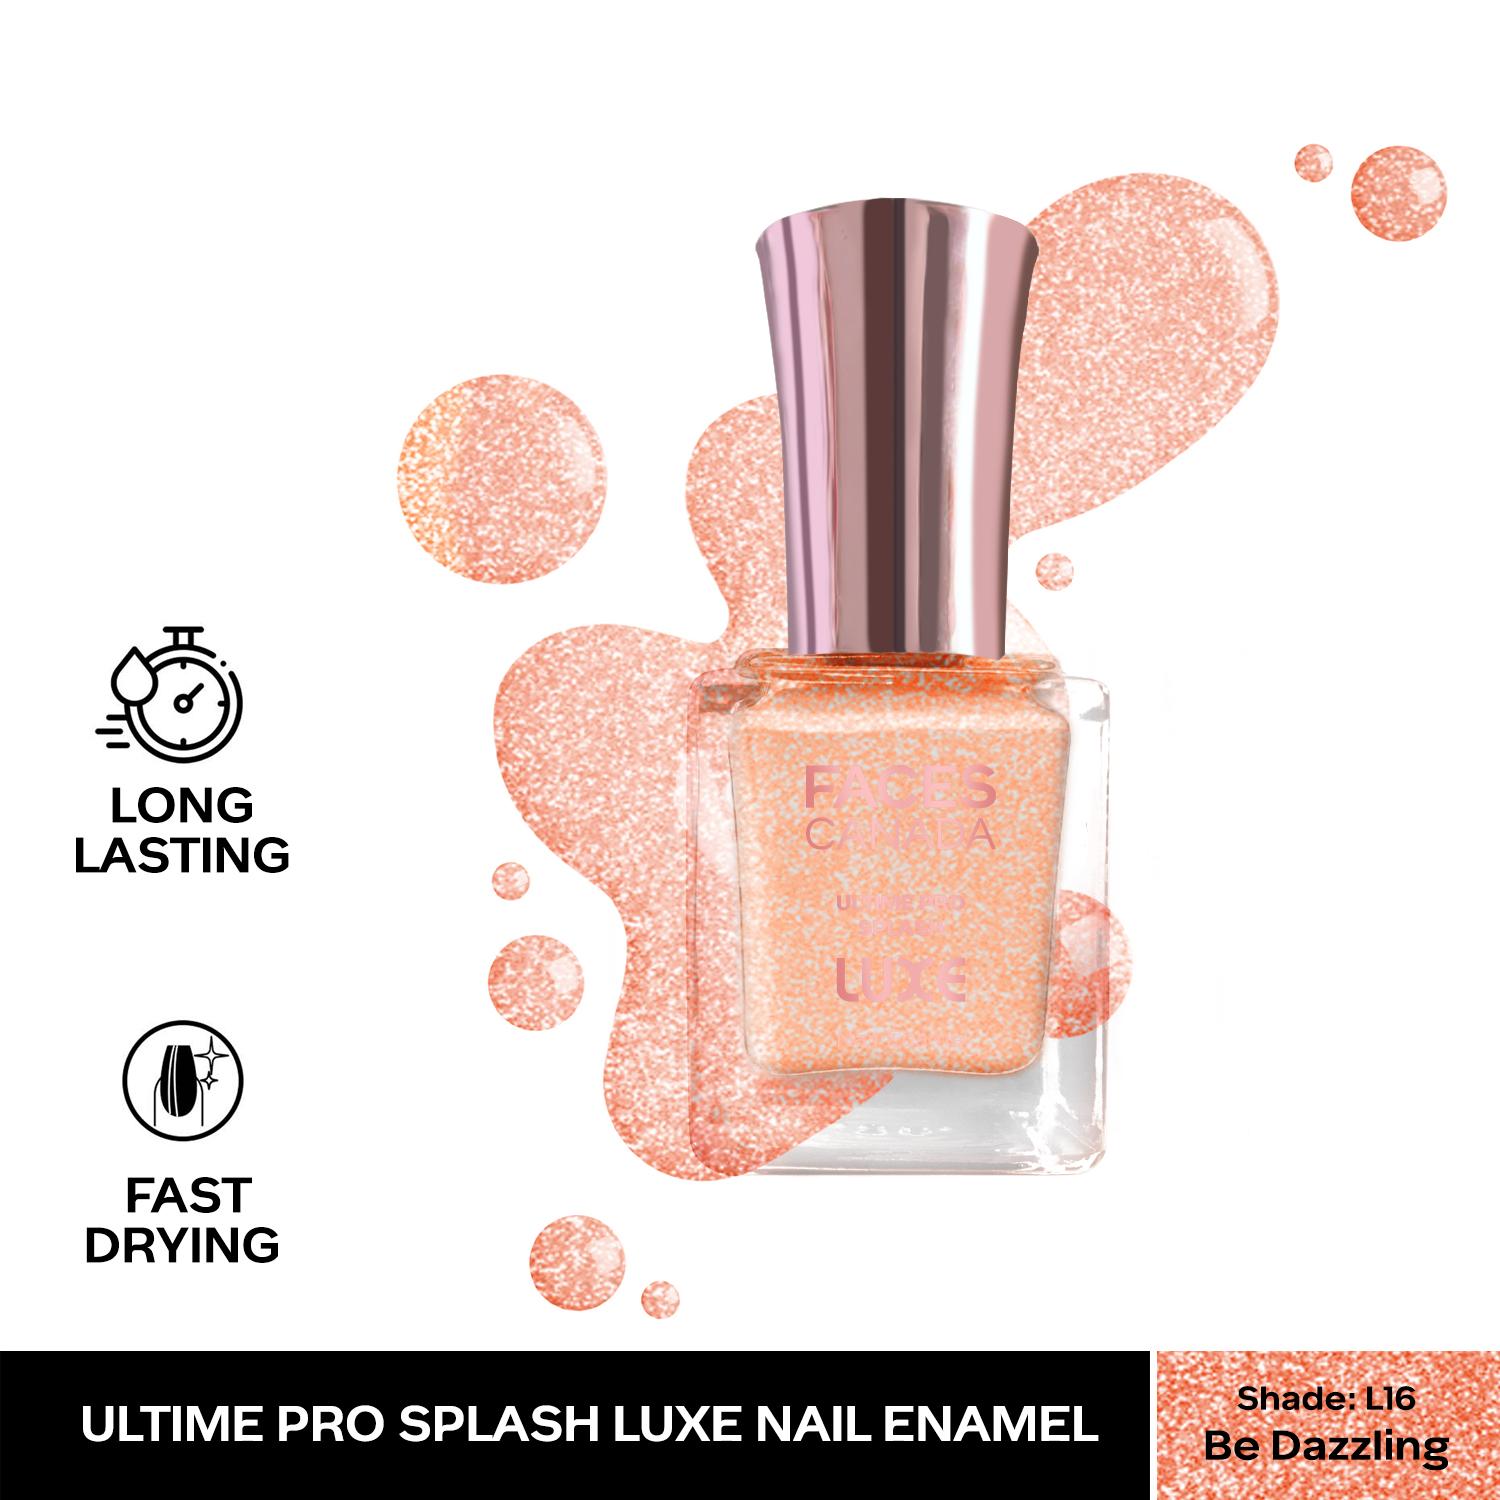 Faces Canada | Faces Canada Ultime Pro Splash Luxe Nail Enamel - Be Dazzling (L16), Glossy Finish (12 ml)